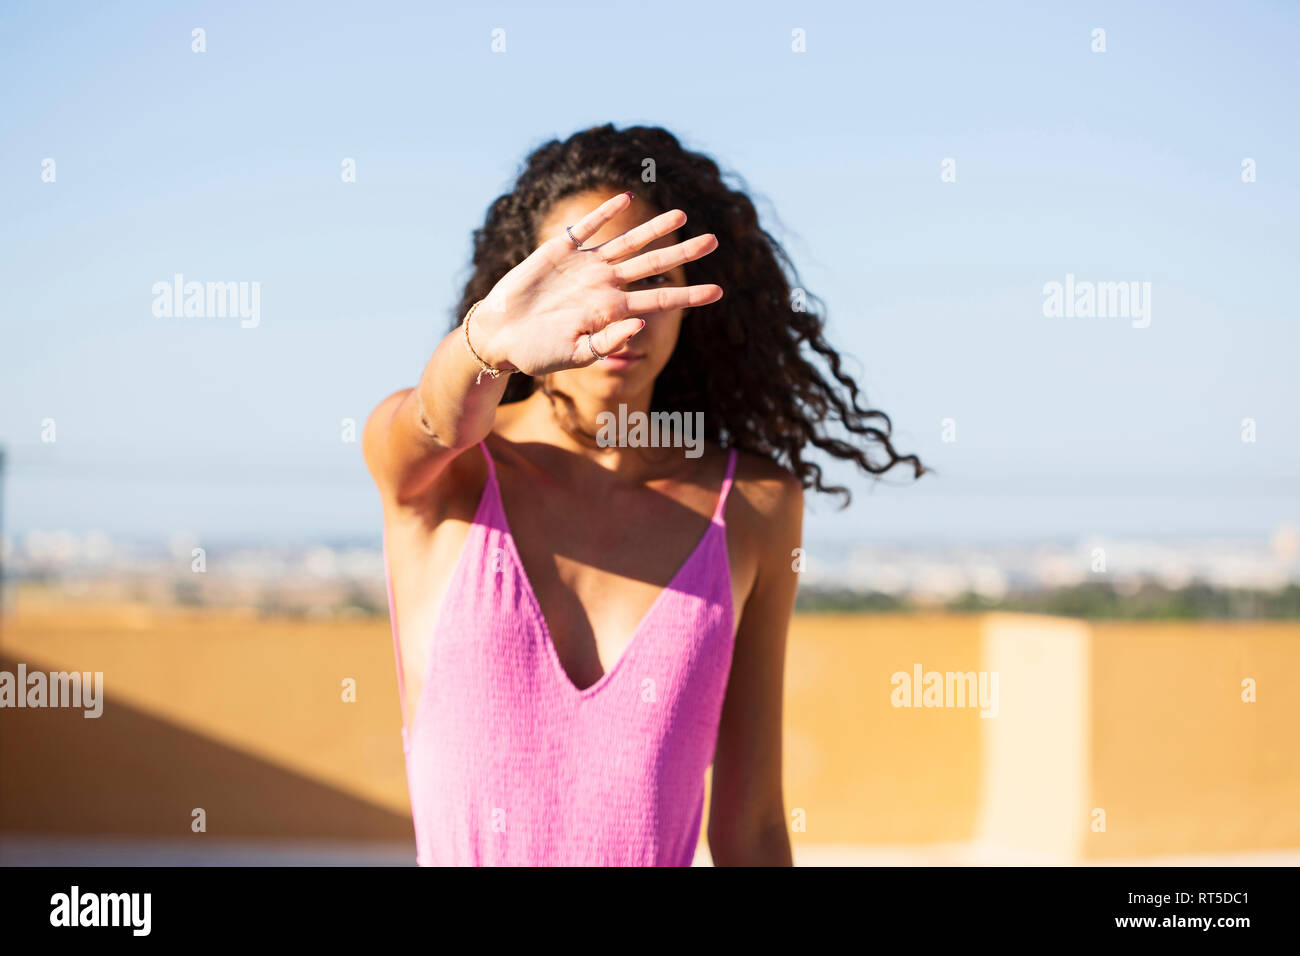 Portrait of teenage girl, obscured face Stock Photo